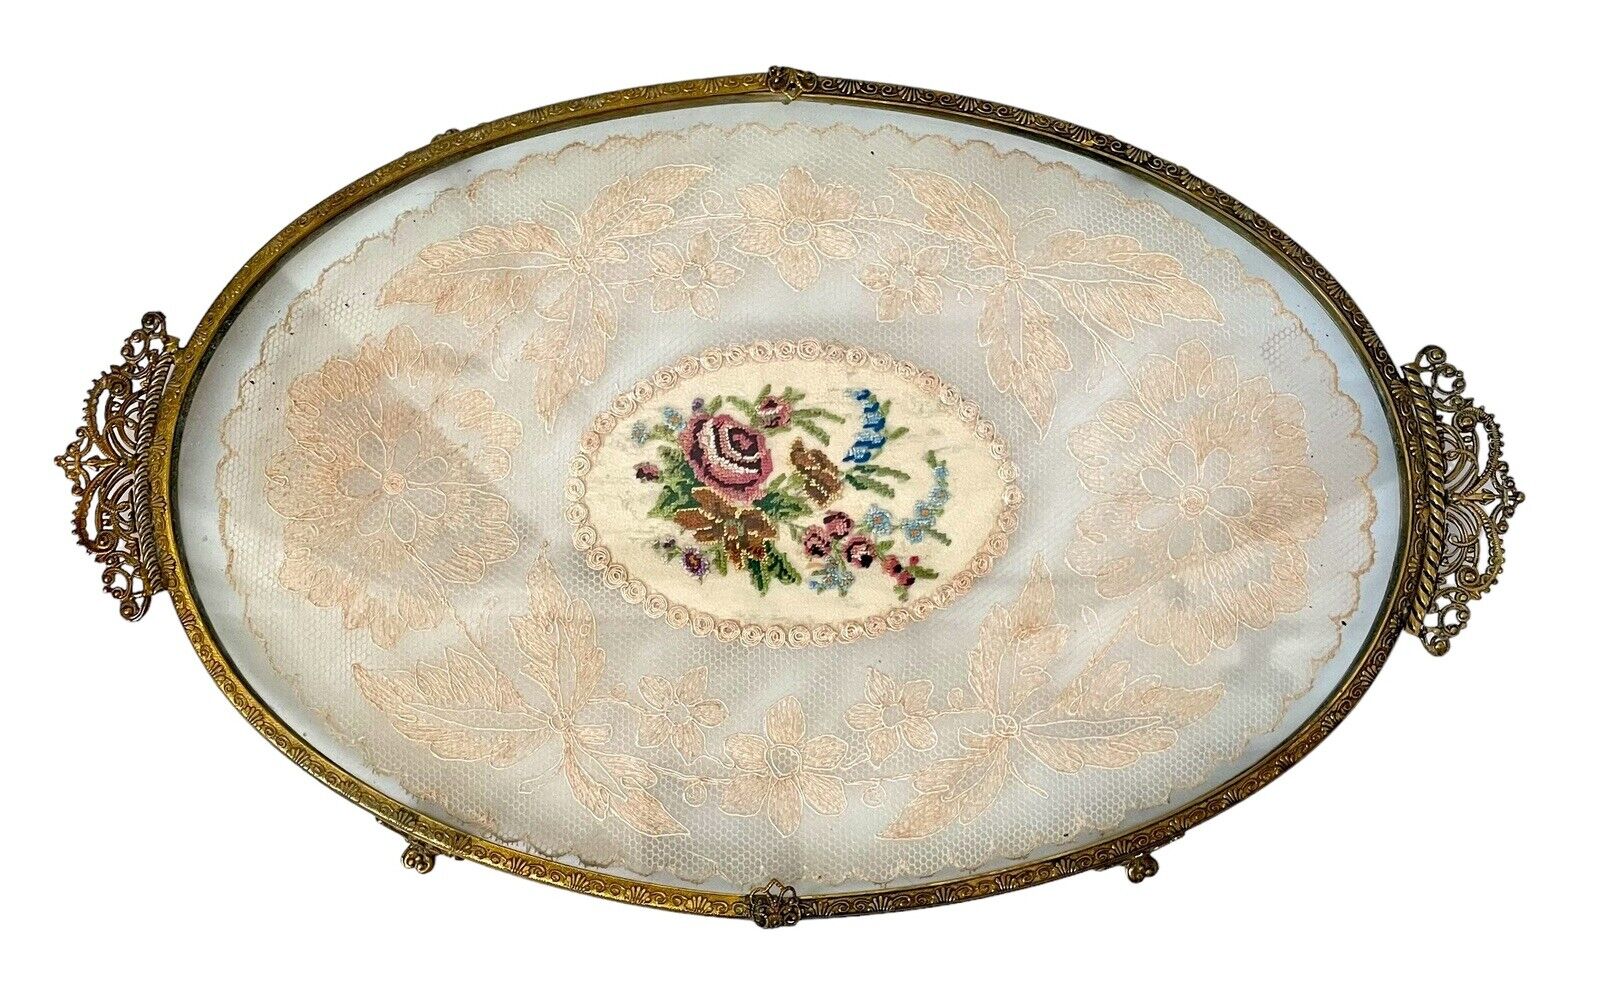 Antique Petit Point Ornate Gold-Tone Vanity Tray, Lace Under Glass